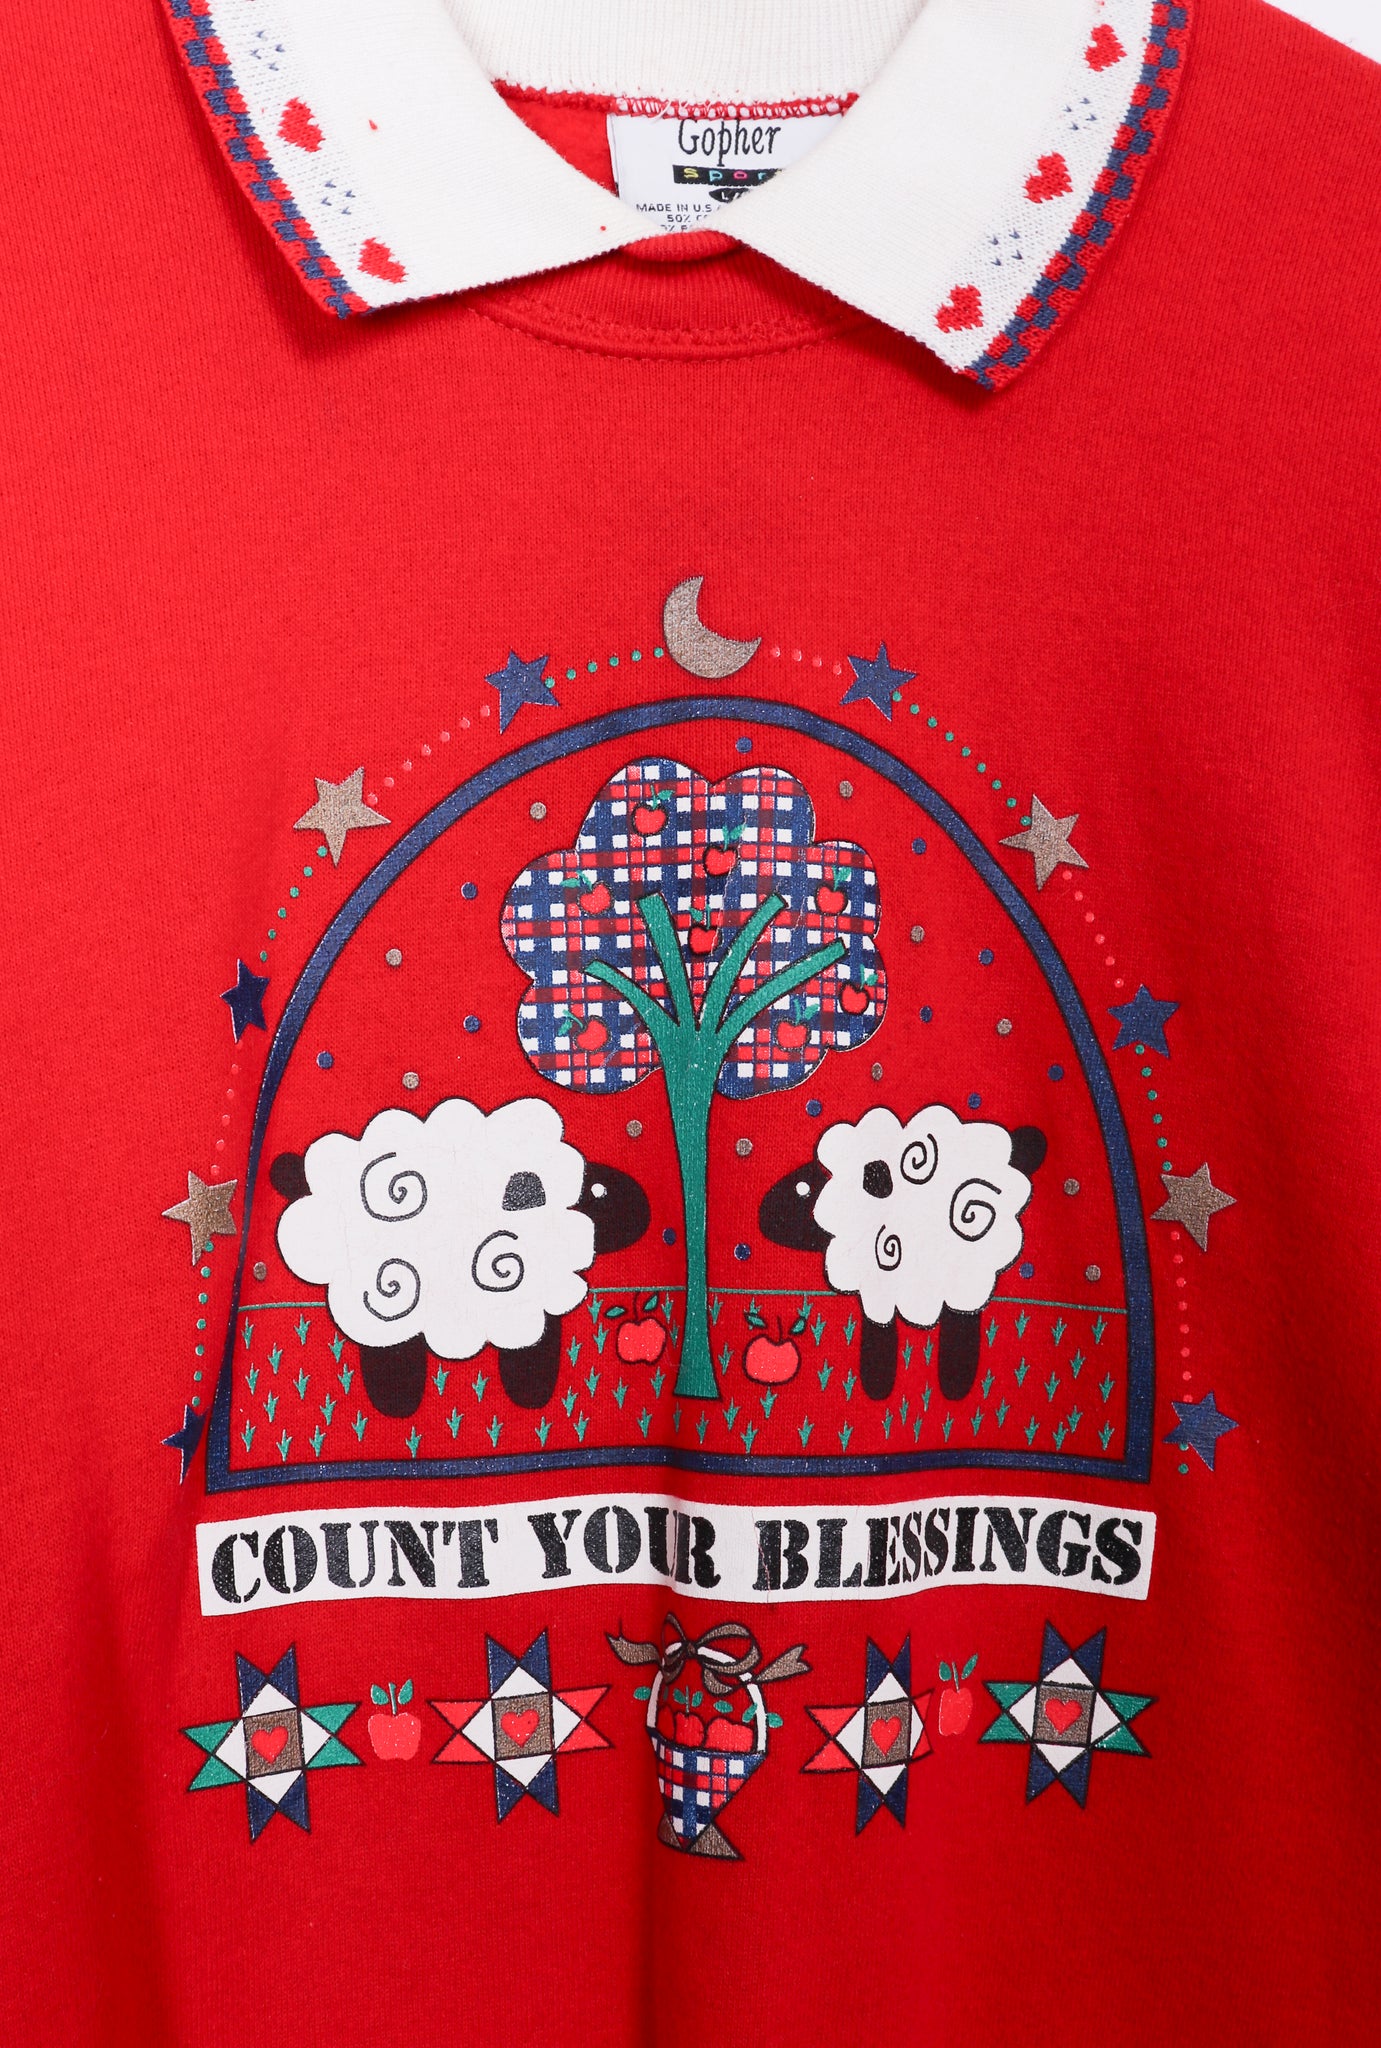 90s Gopher Sport "Count Your Blessings" Crewneck